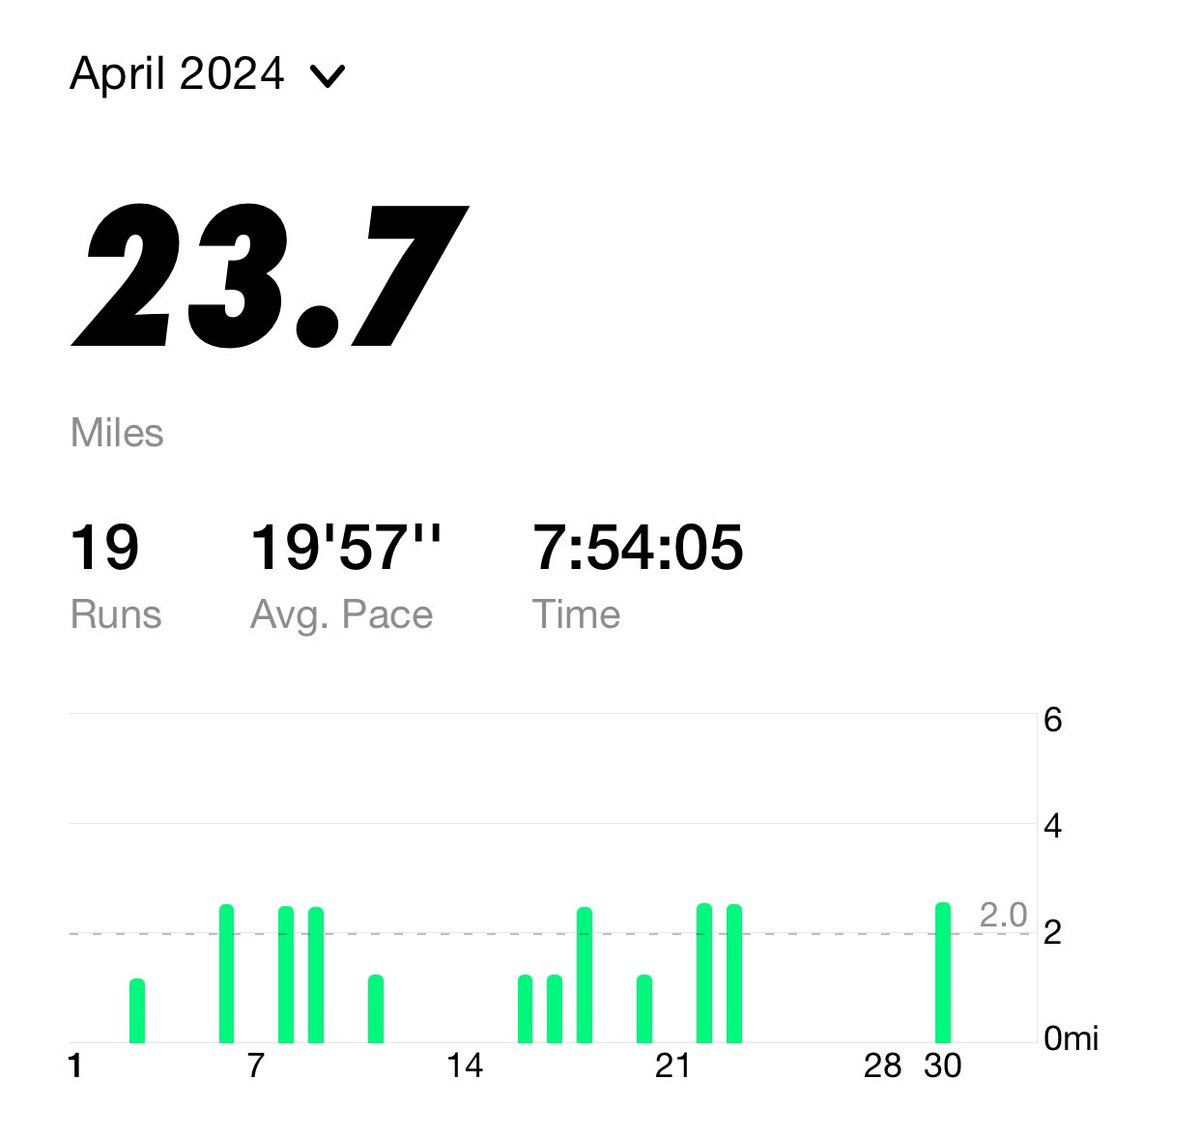 Almost 24 miles in April. Not bad. 🏃🏿 🚶🏿